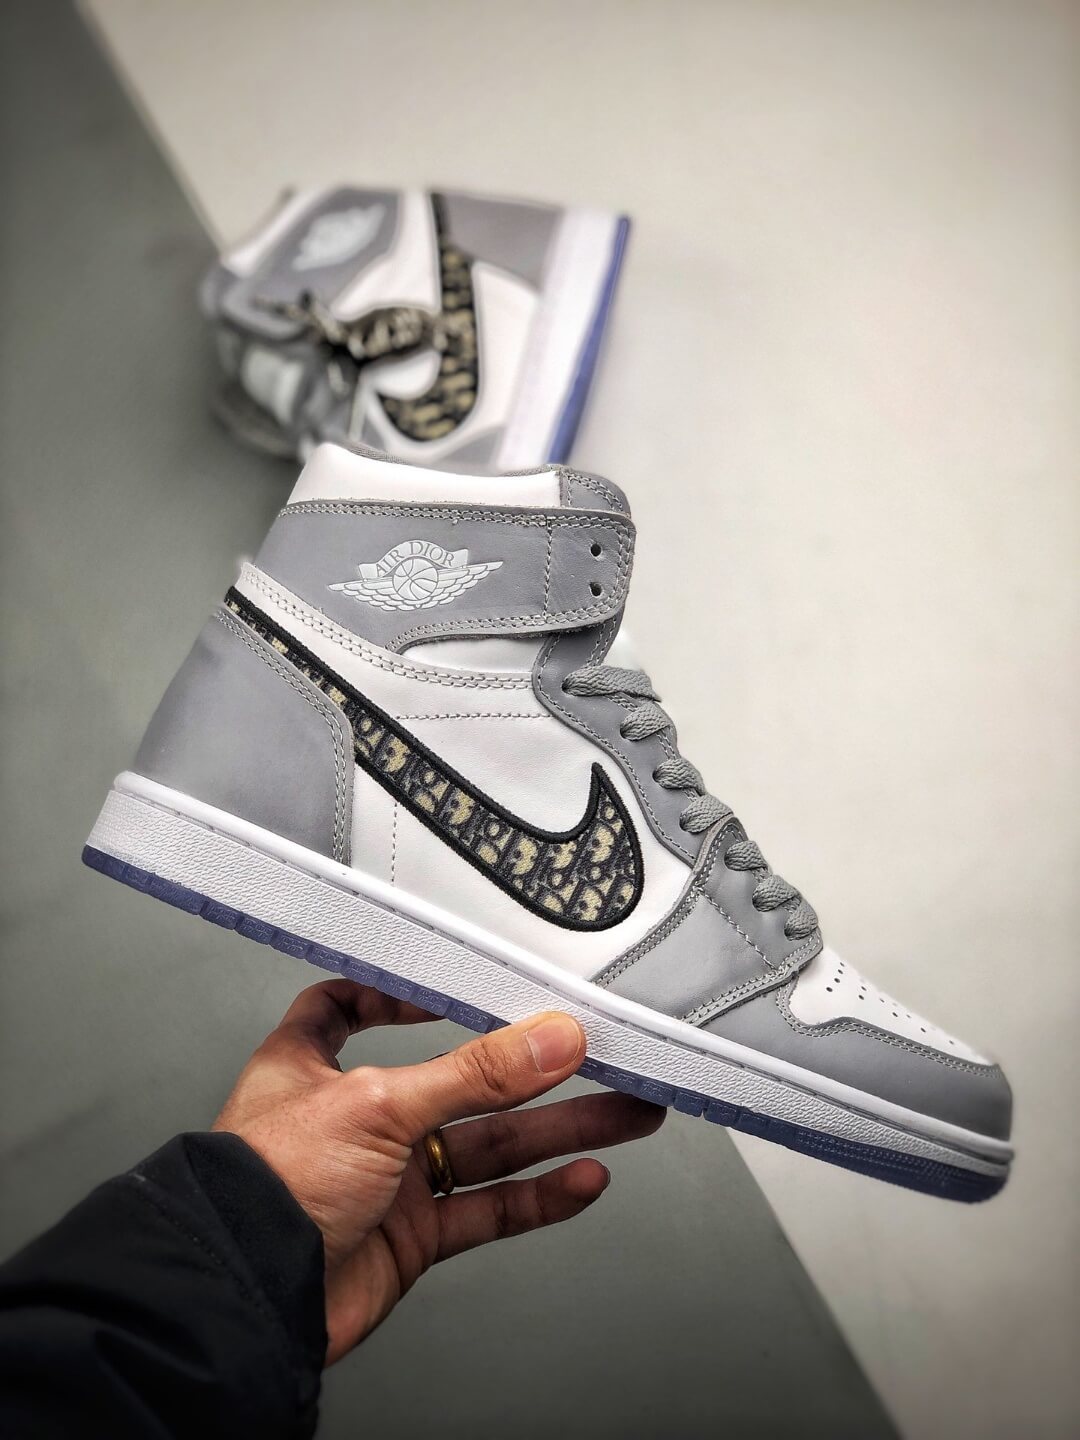 The Dior x Air Jordan 1 High Sneaker White and Grey Upper Top RepShoes